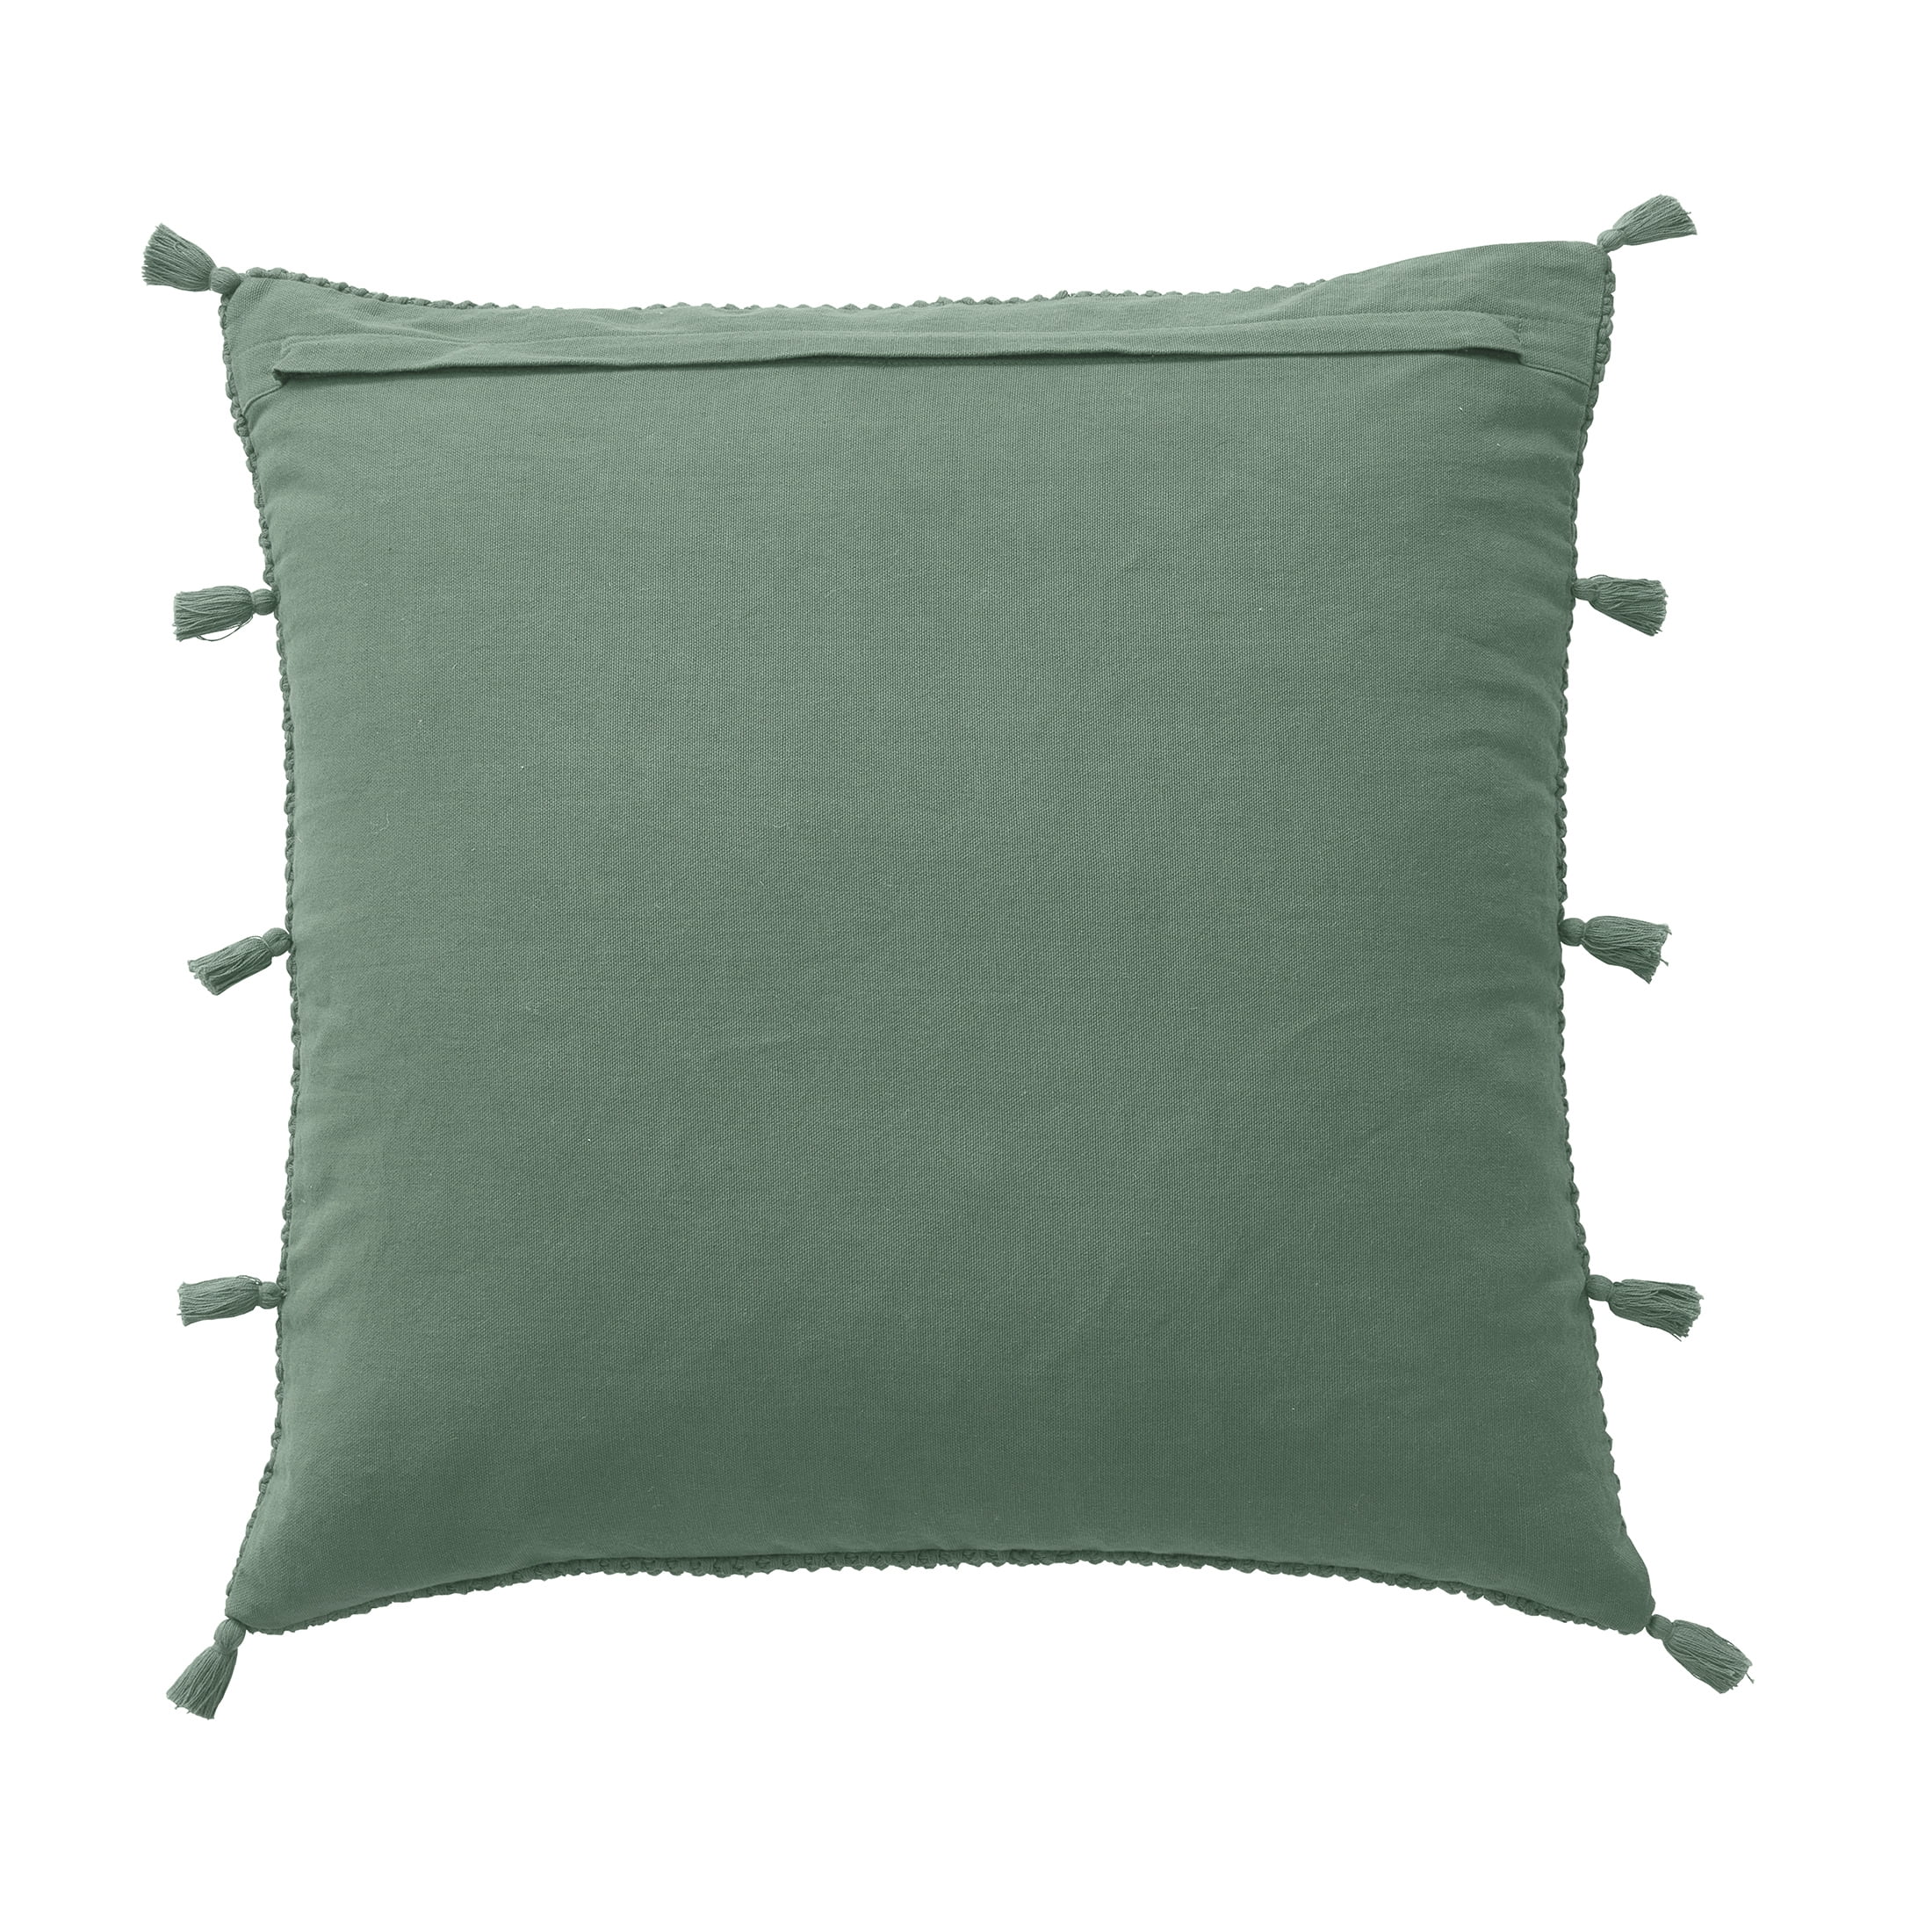 Groovy Peace Green on Navy Pillow Cover – Studio Arethusa